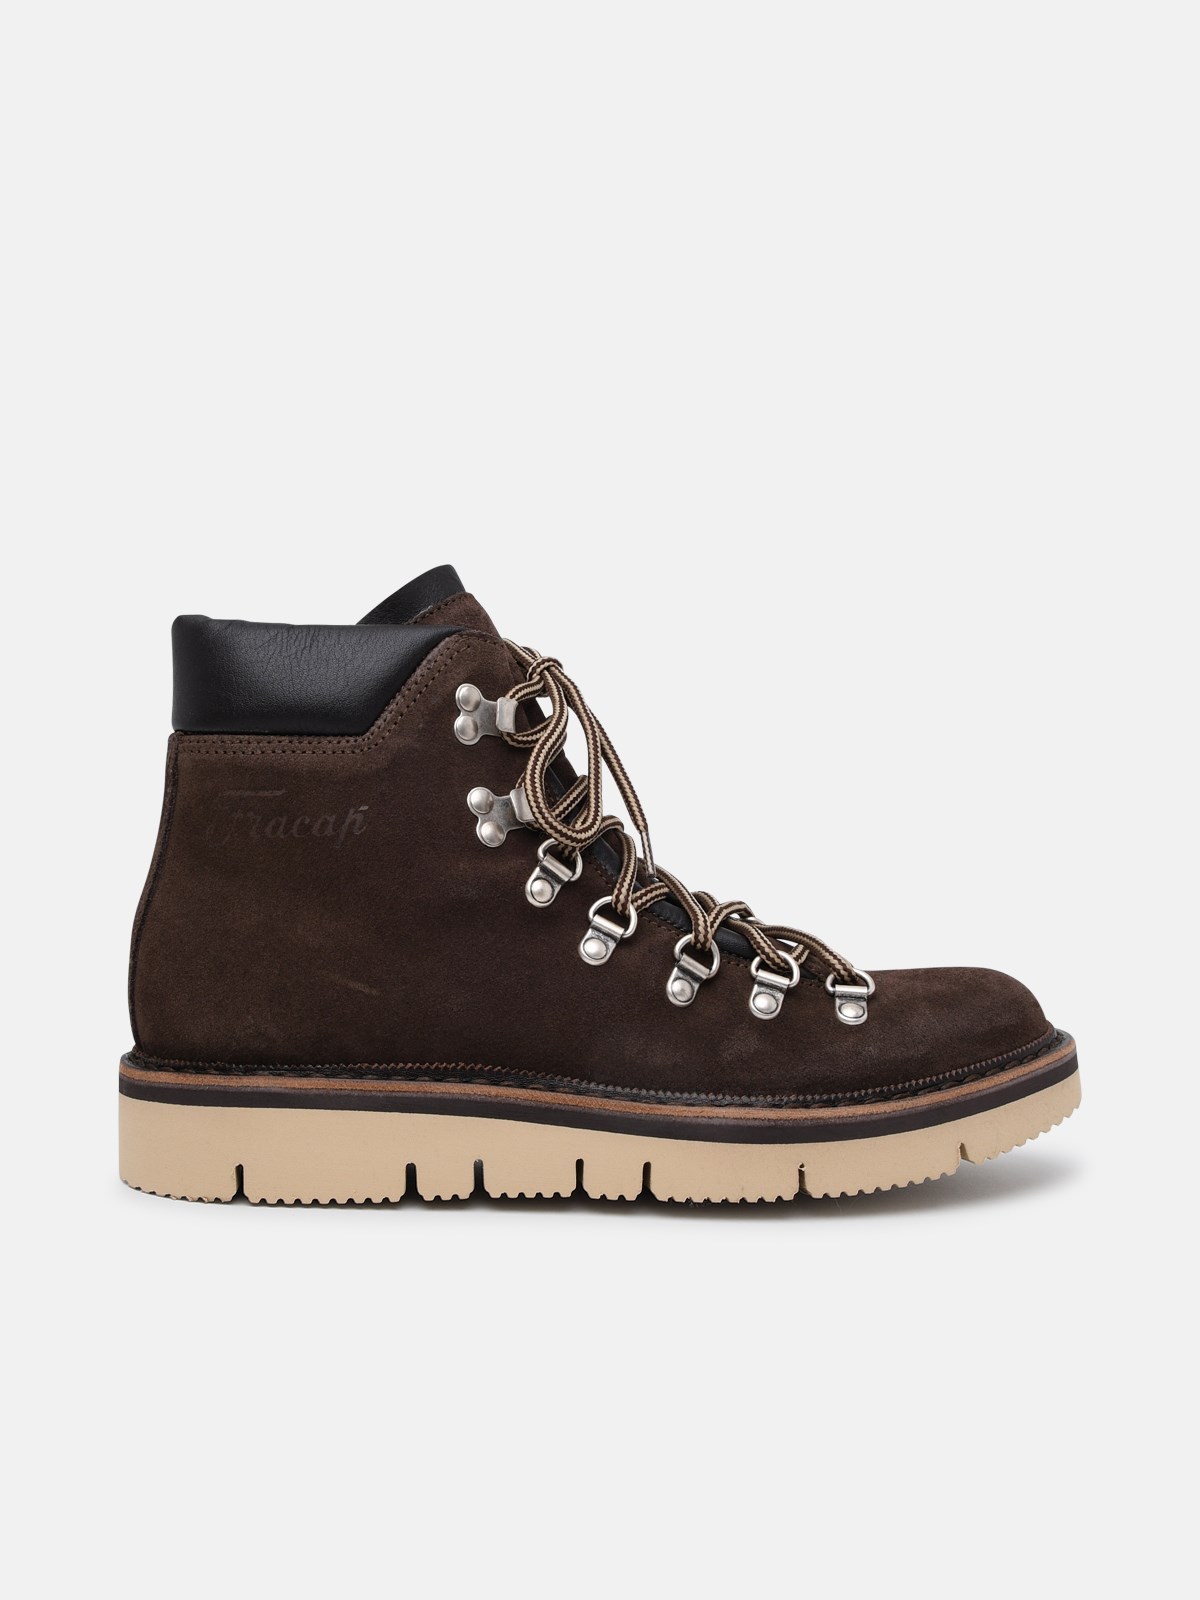 Fracap Brown Suede A300 Boot